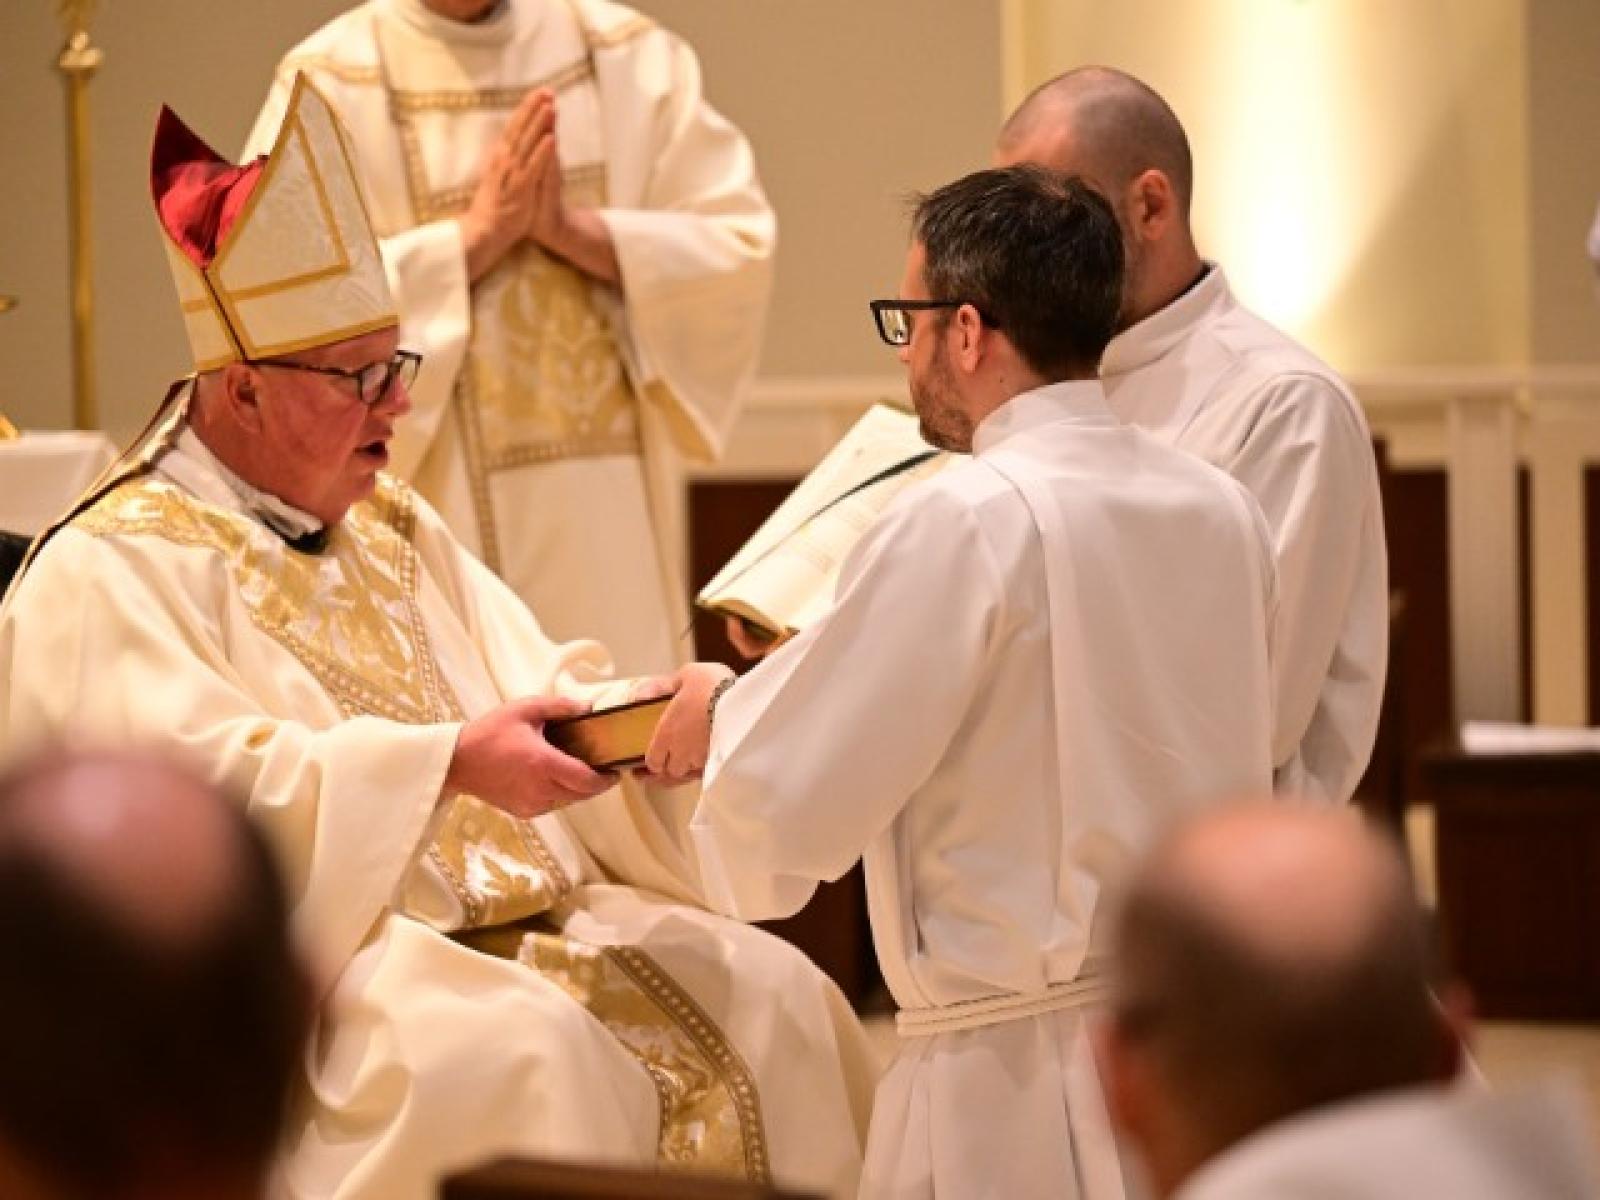 Bishop William D. Byrne with John Anthony Ippolito _25, Archdiocese of New York